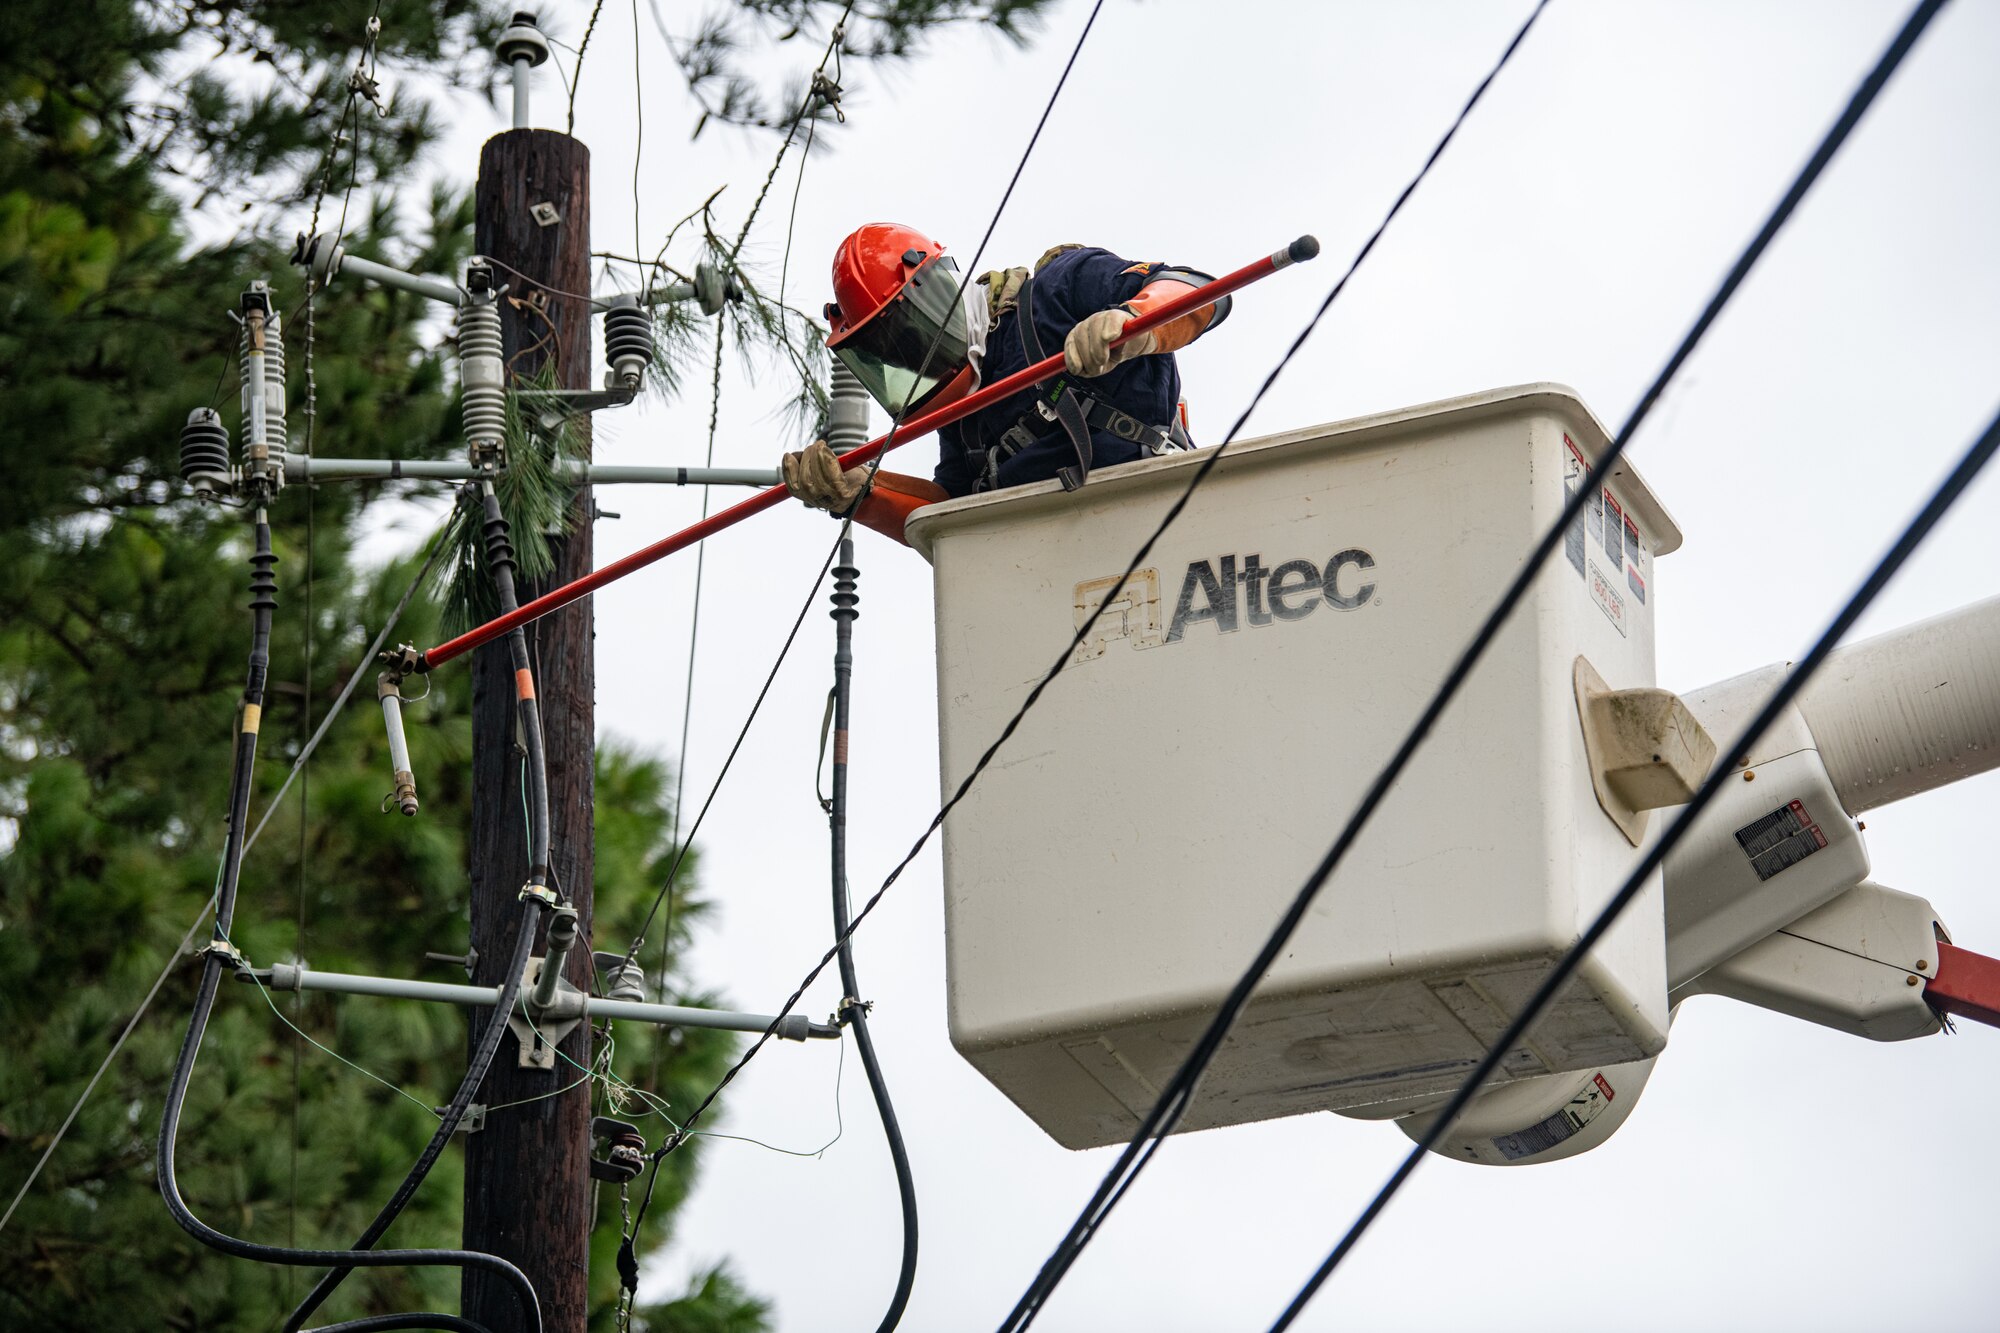 An Airman replaces a fuse on a power line